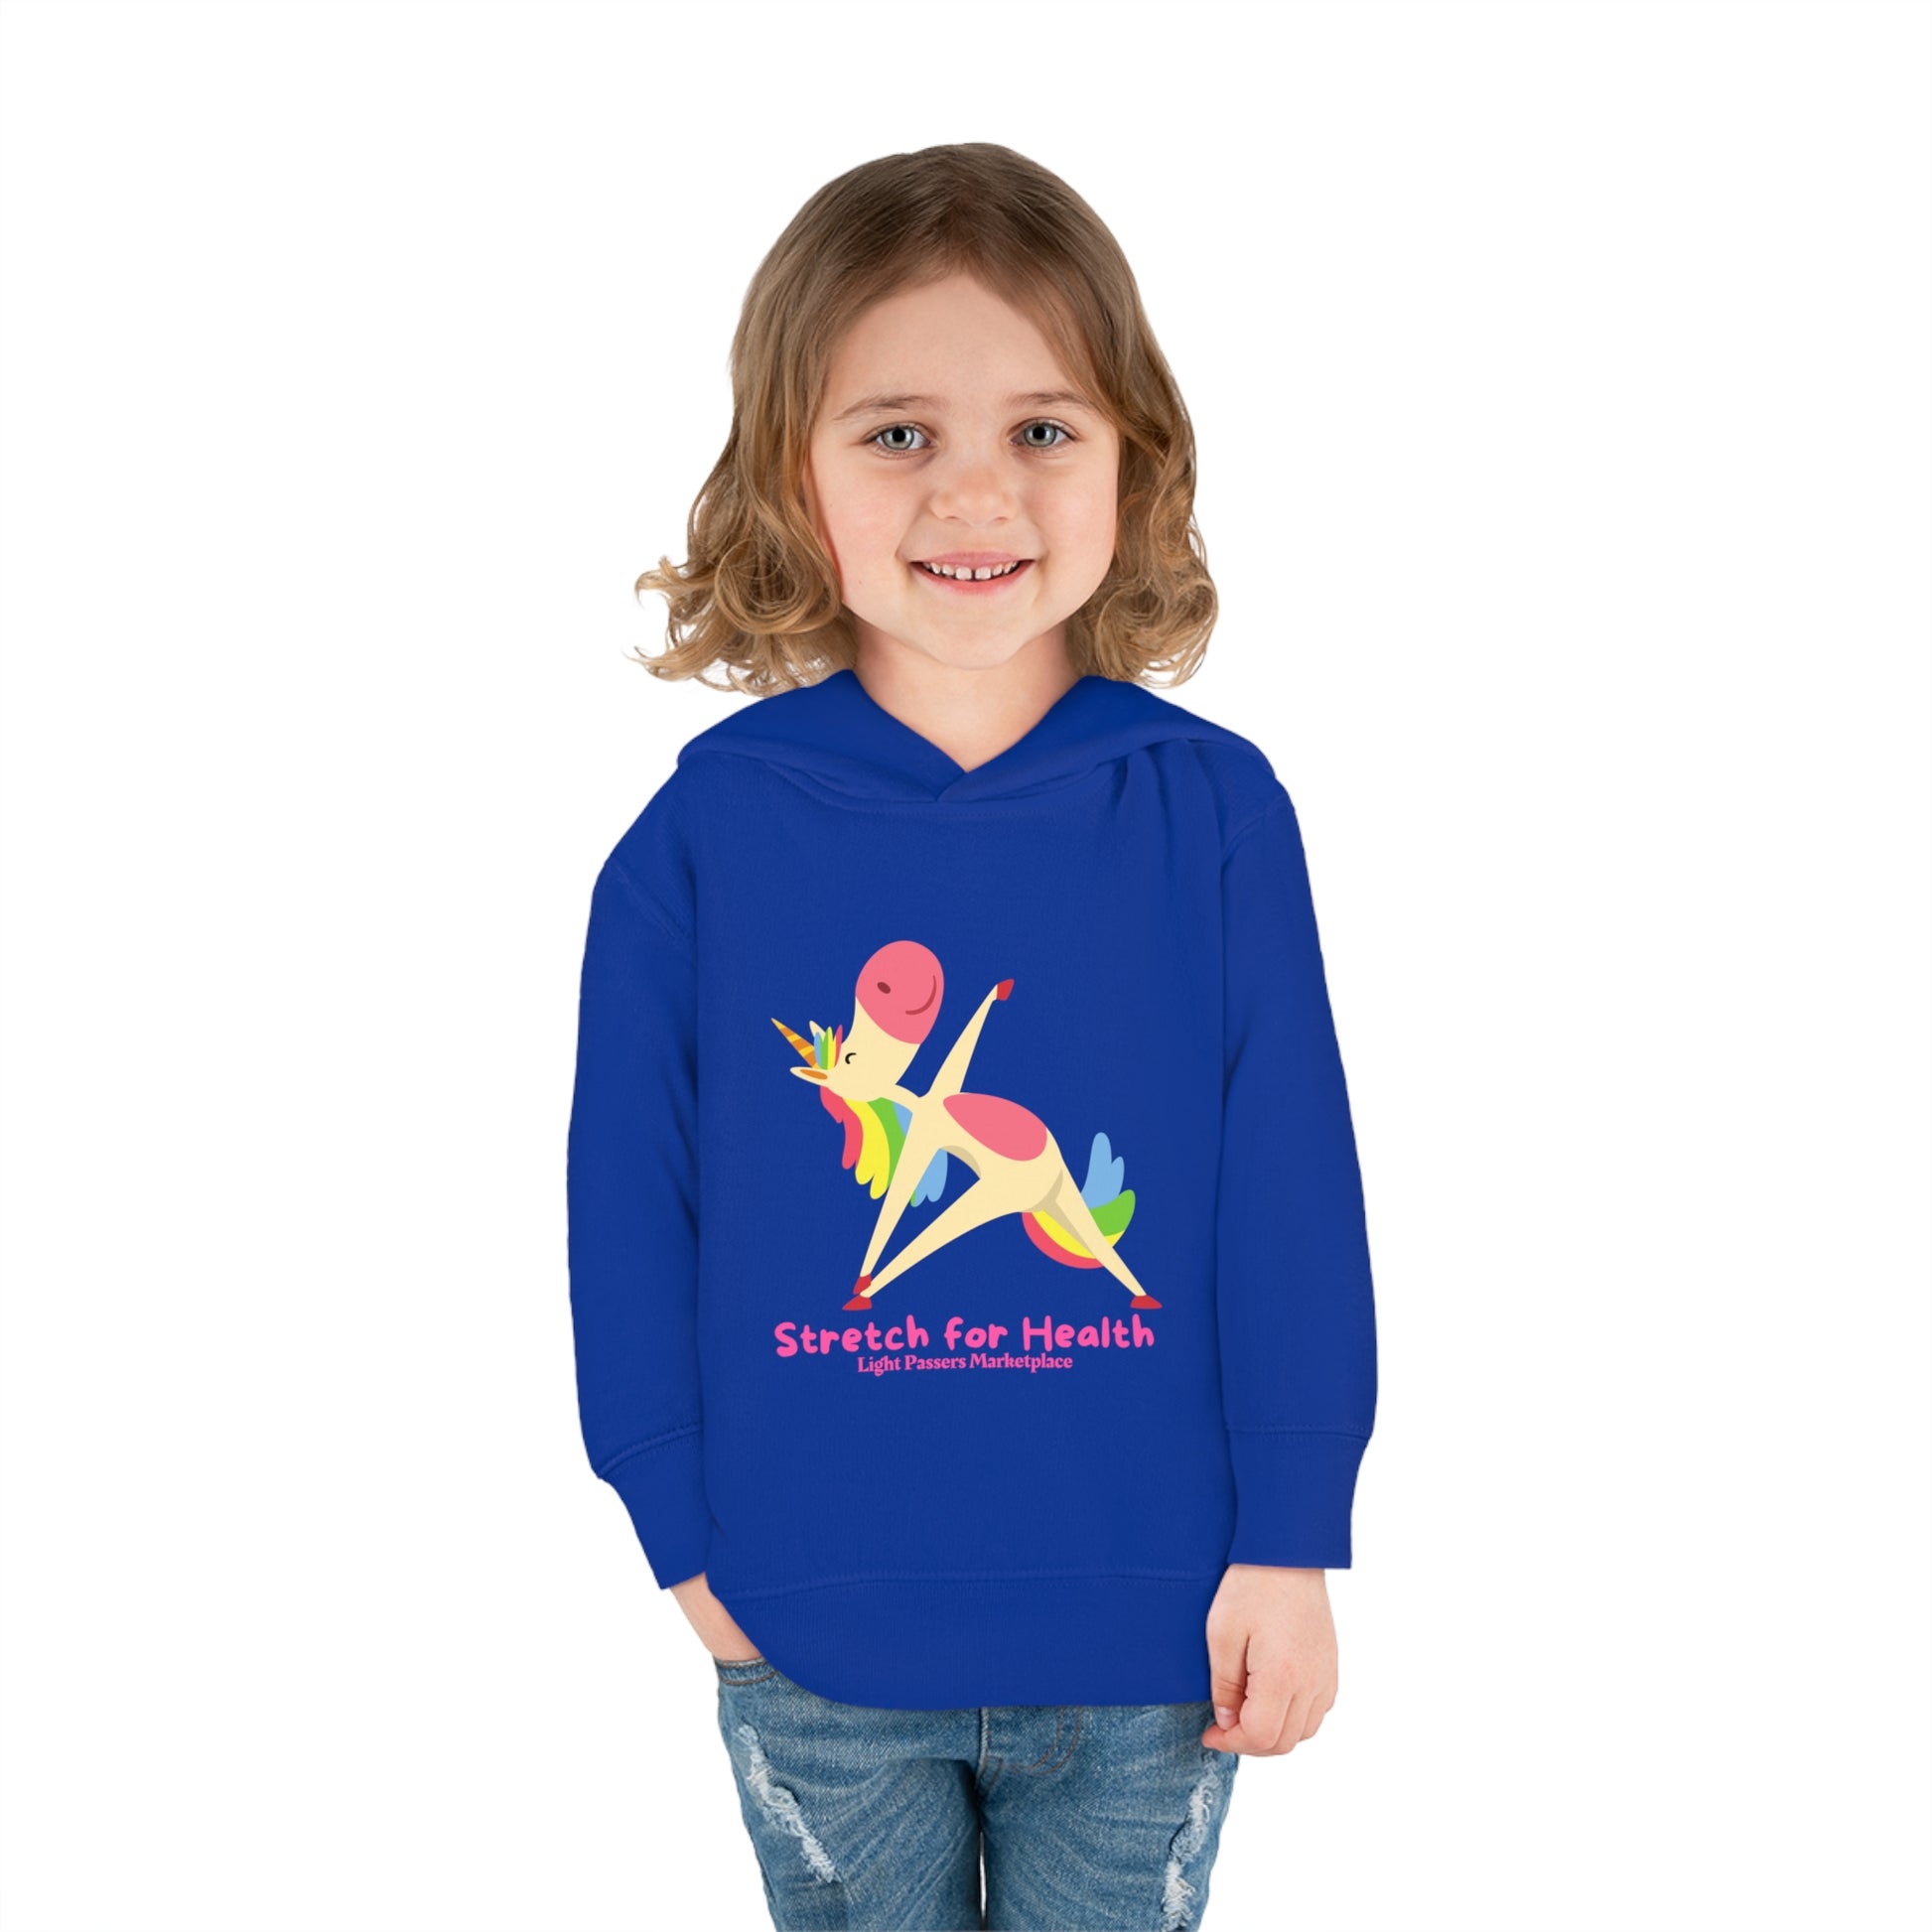 A toddler in a blue hoodie with a cartoon unicorn design, smiling at the camera. Features jersey-lined hood, side seam pockets, and durable stitching for lasting comfort.